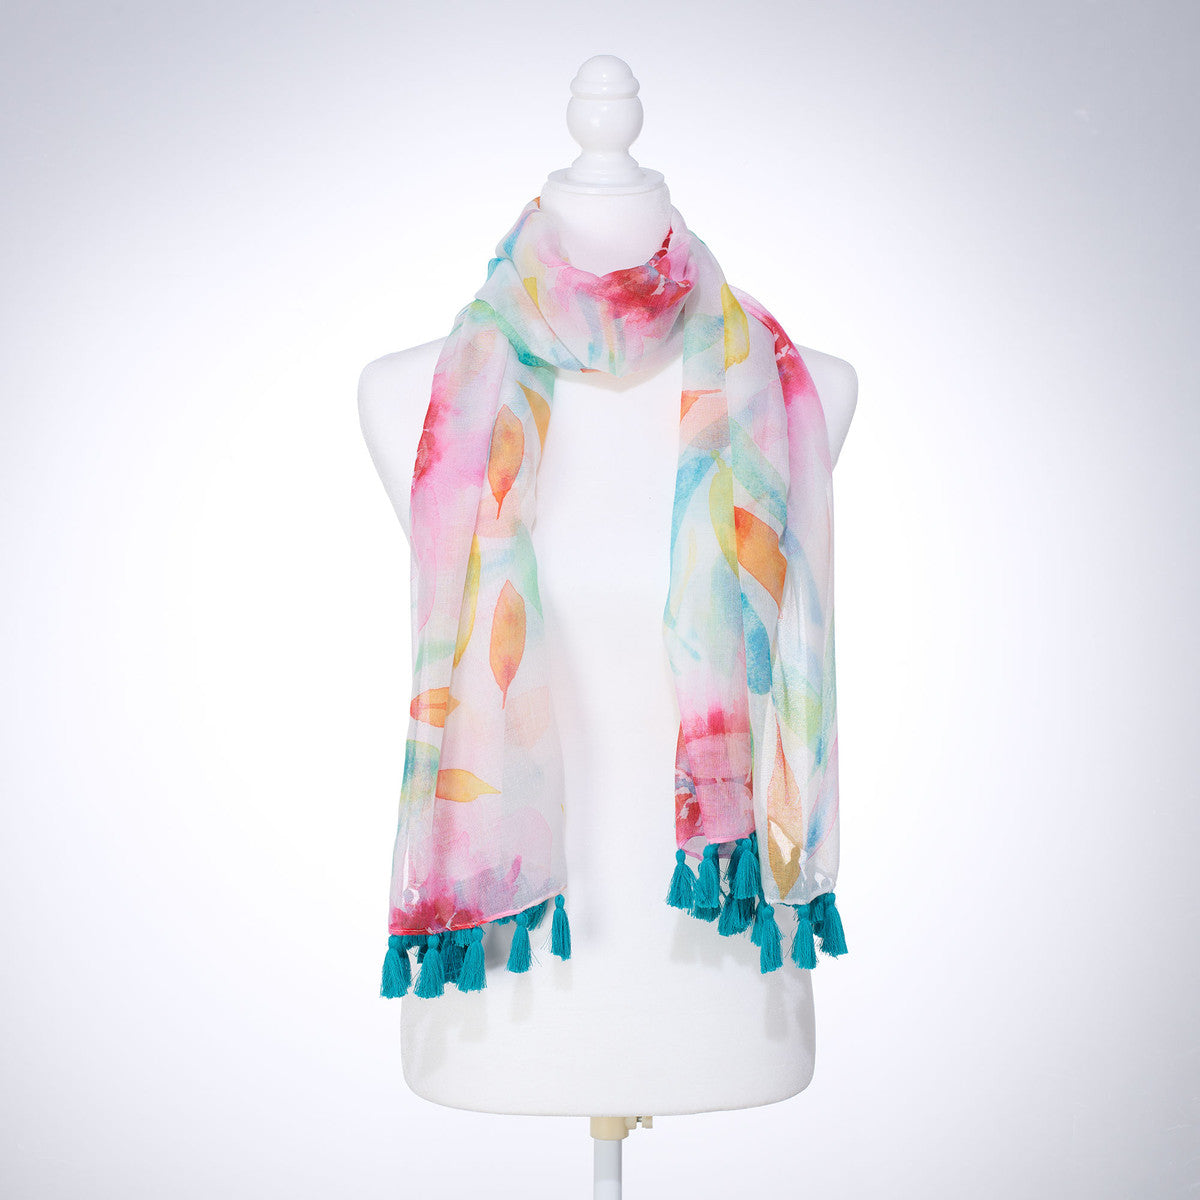 Wrap Yourself In Love Pink Daisies Scarf - The Christian Gift Company